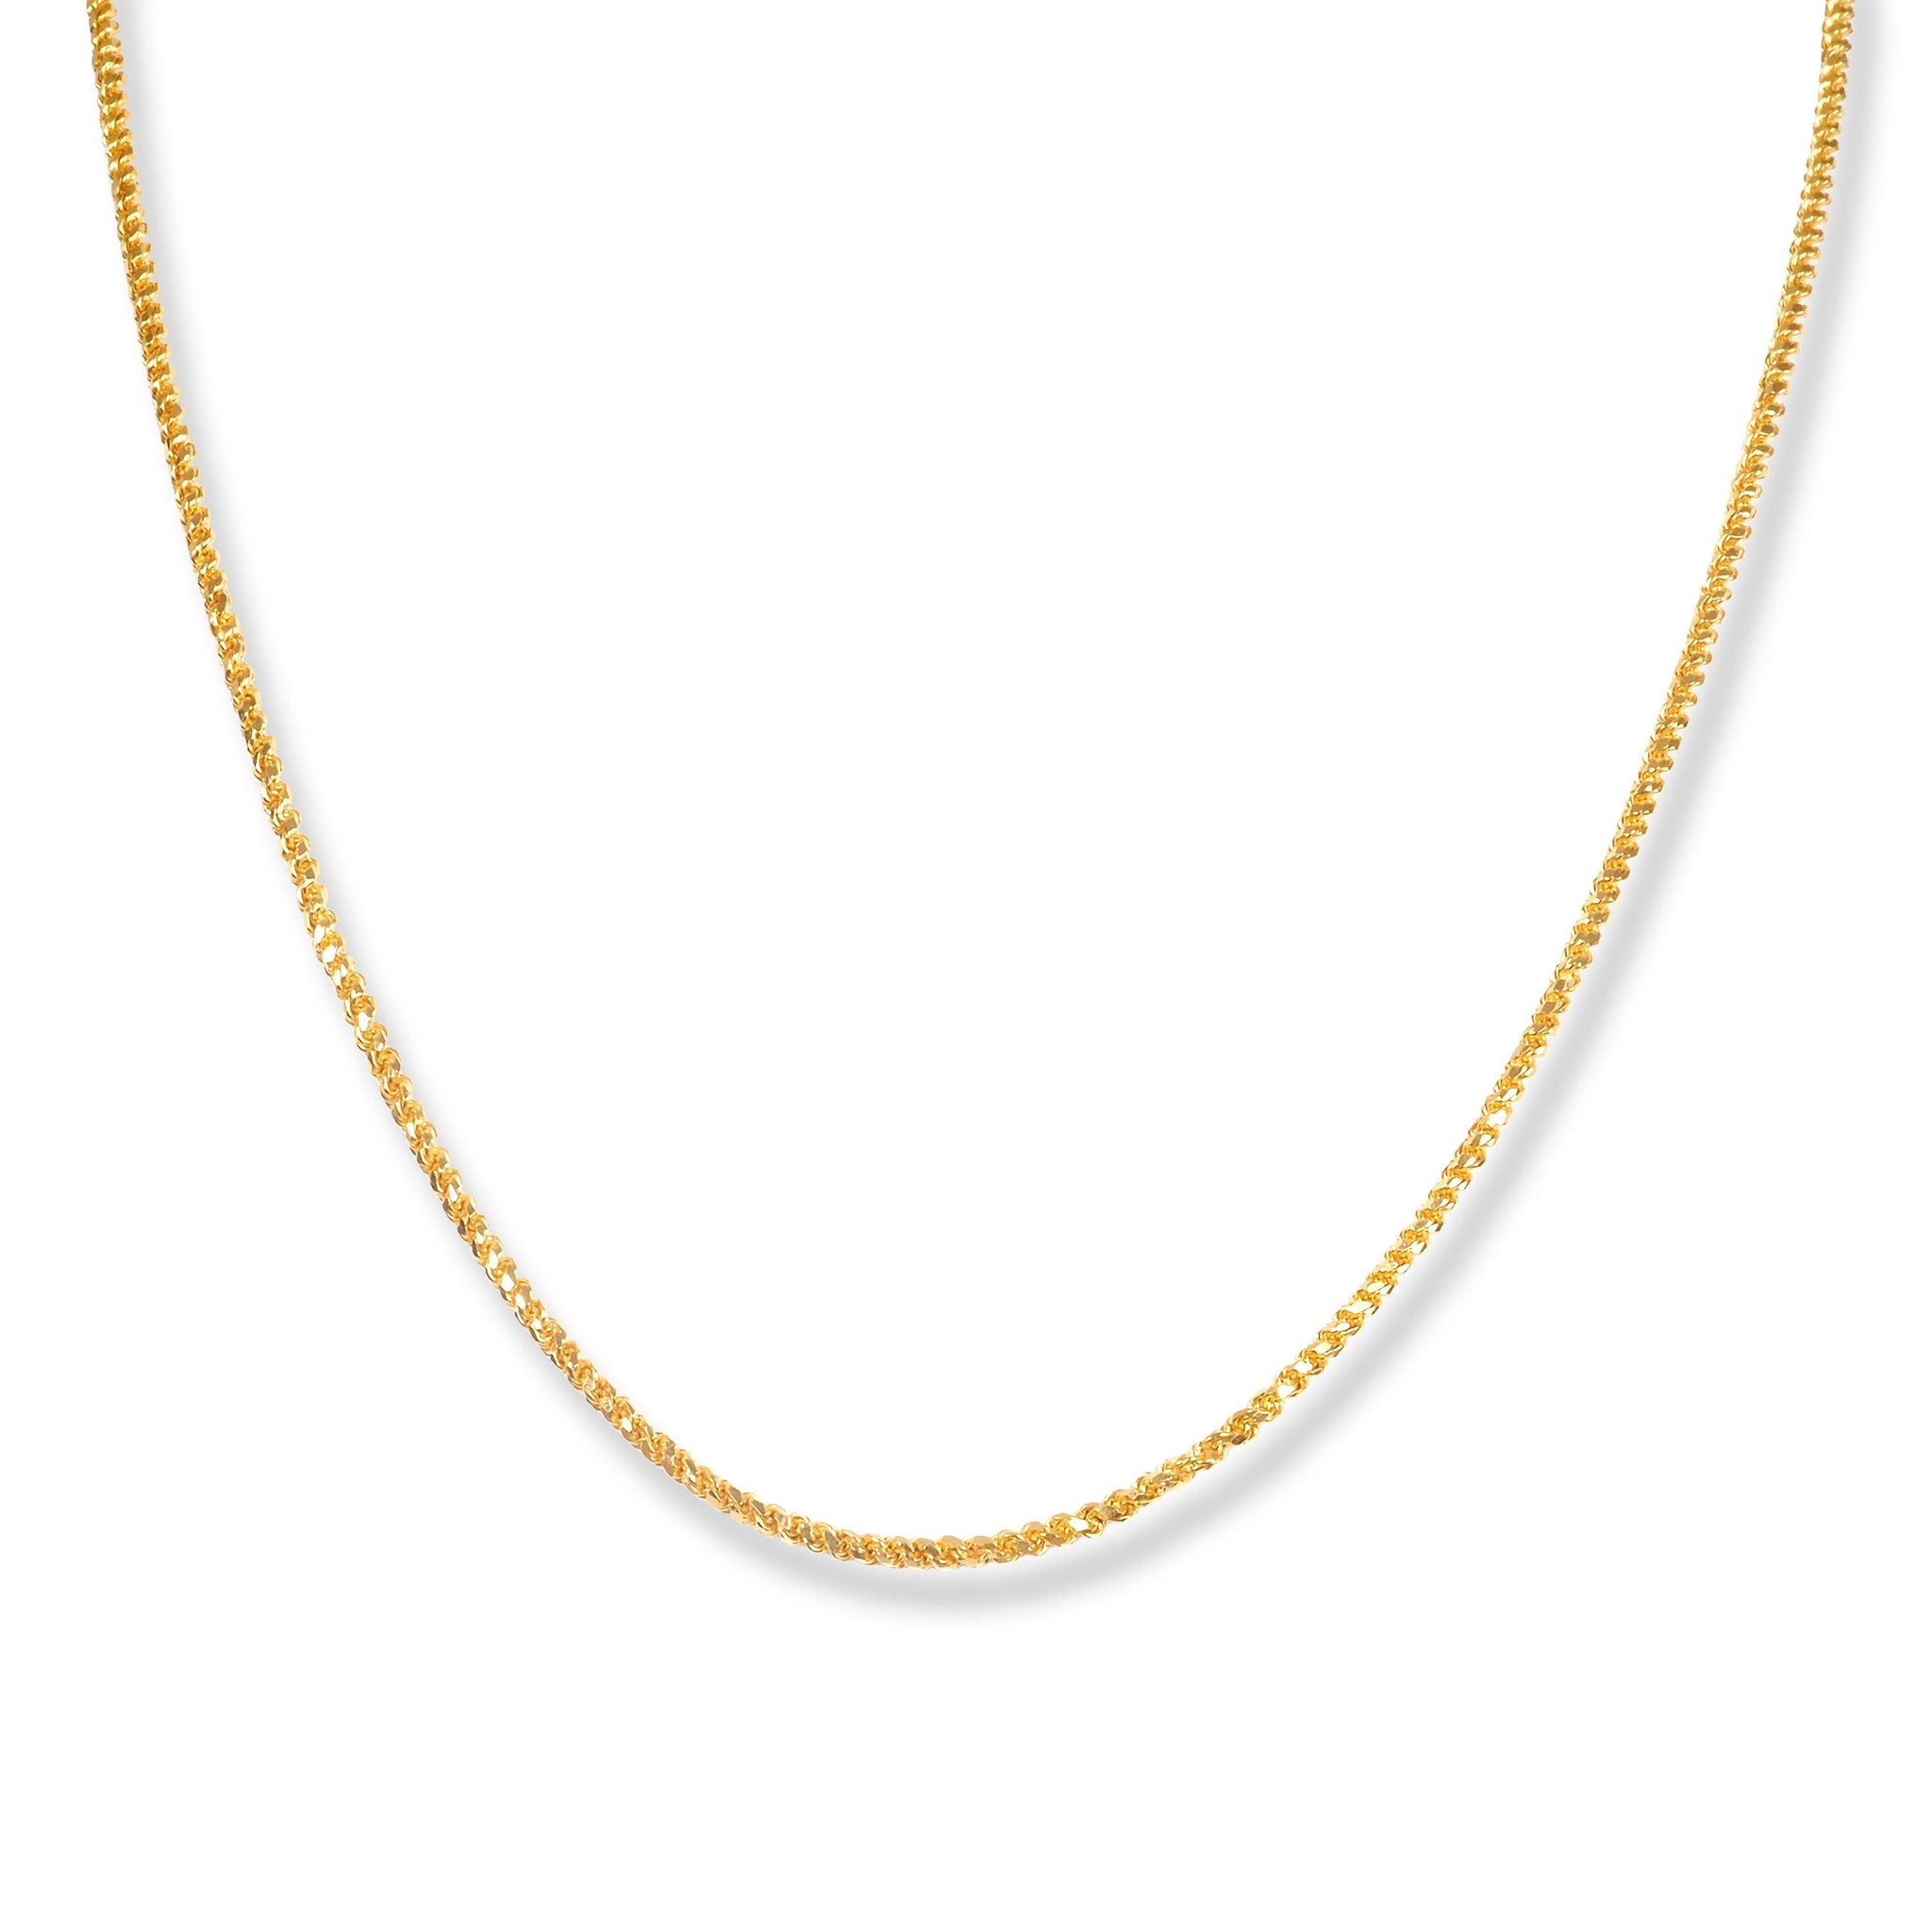 22ct Gold Rope Chain with Hook Clasp C-7142